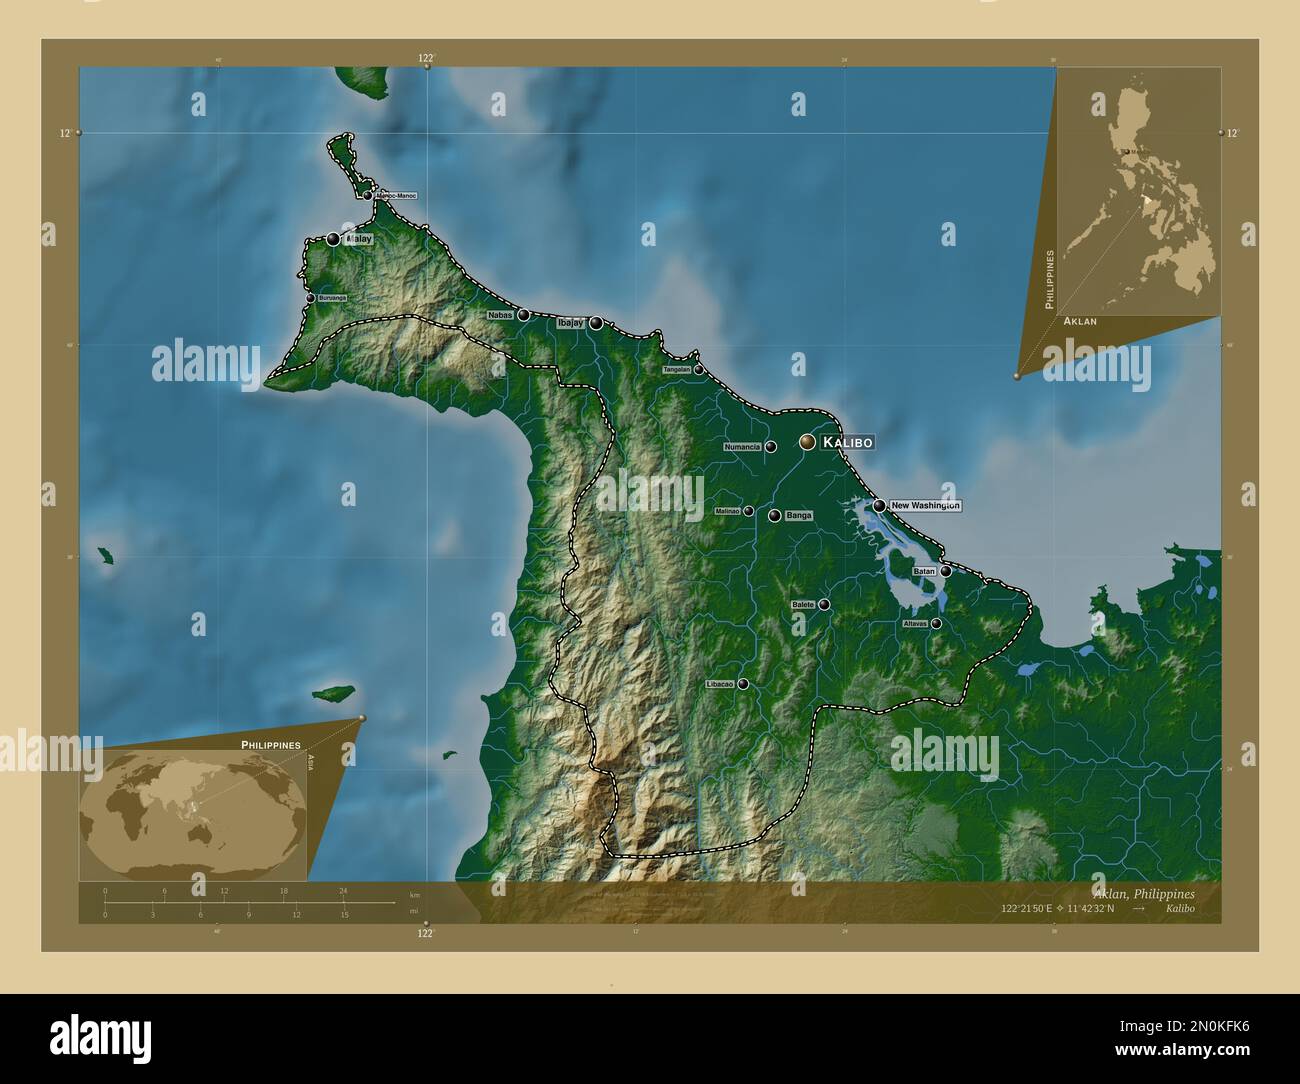 Aklan, province of Philippines. Colored elevation map with lakes and rivers. Locations and names of major cities of the region. Corner auxiliary locat Stock Photo